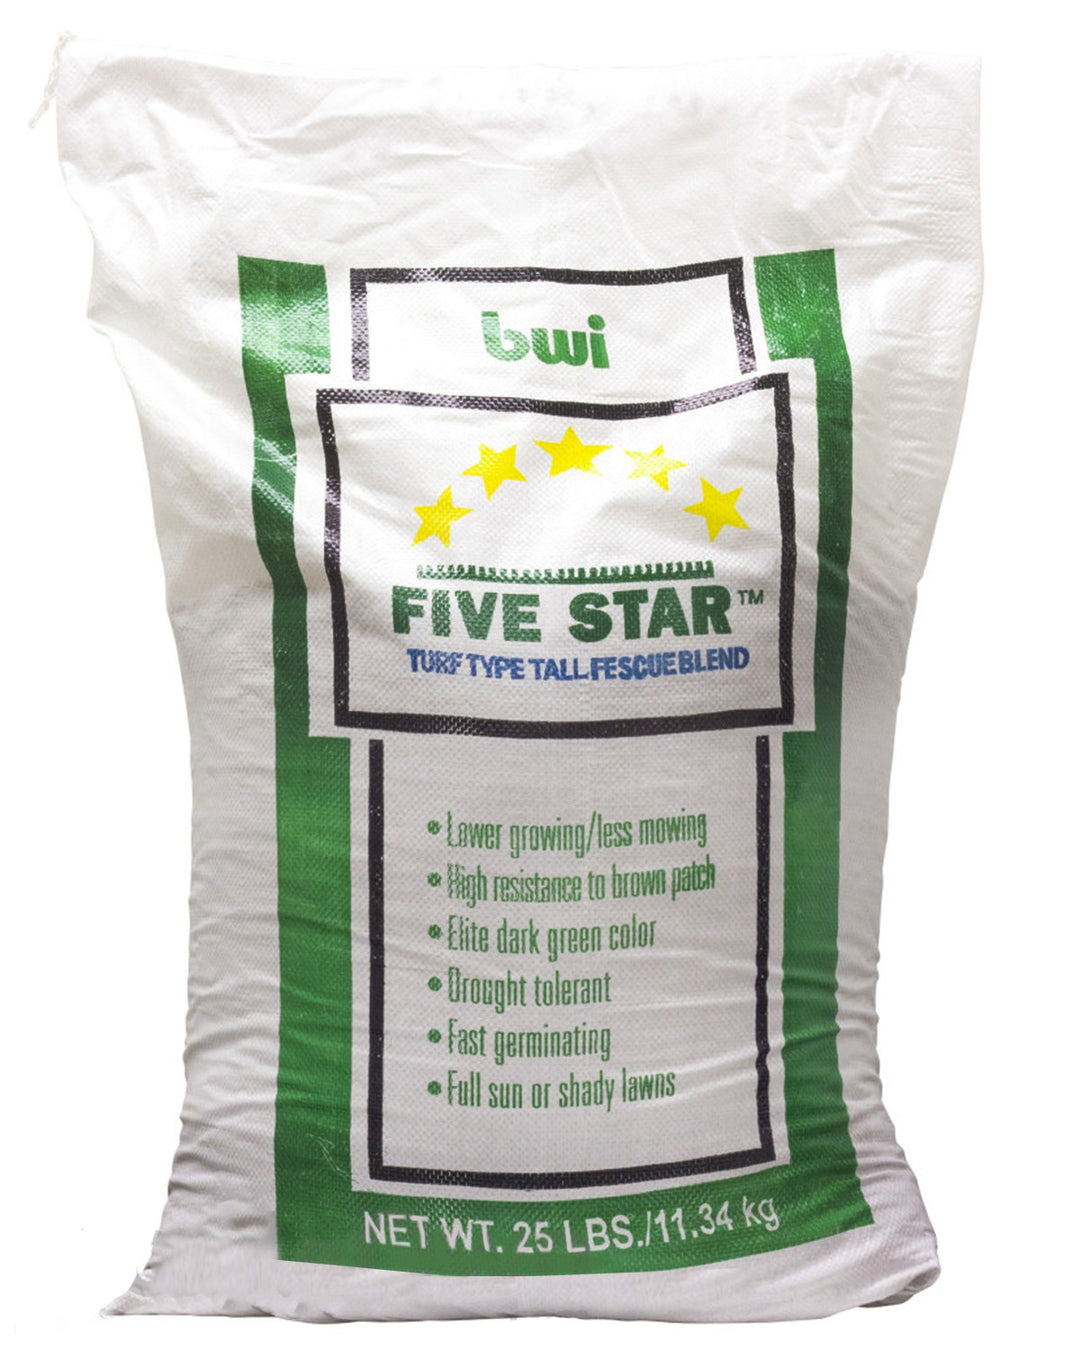 Five Star Turf Type Fescue Seed*